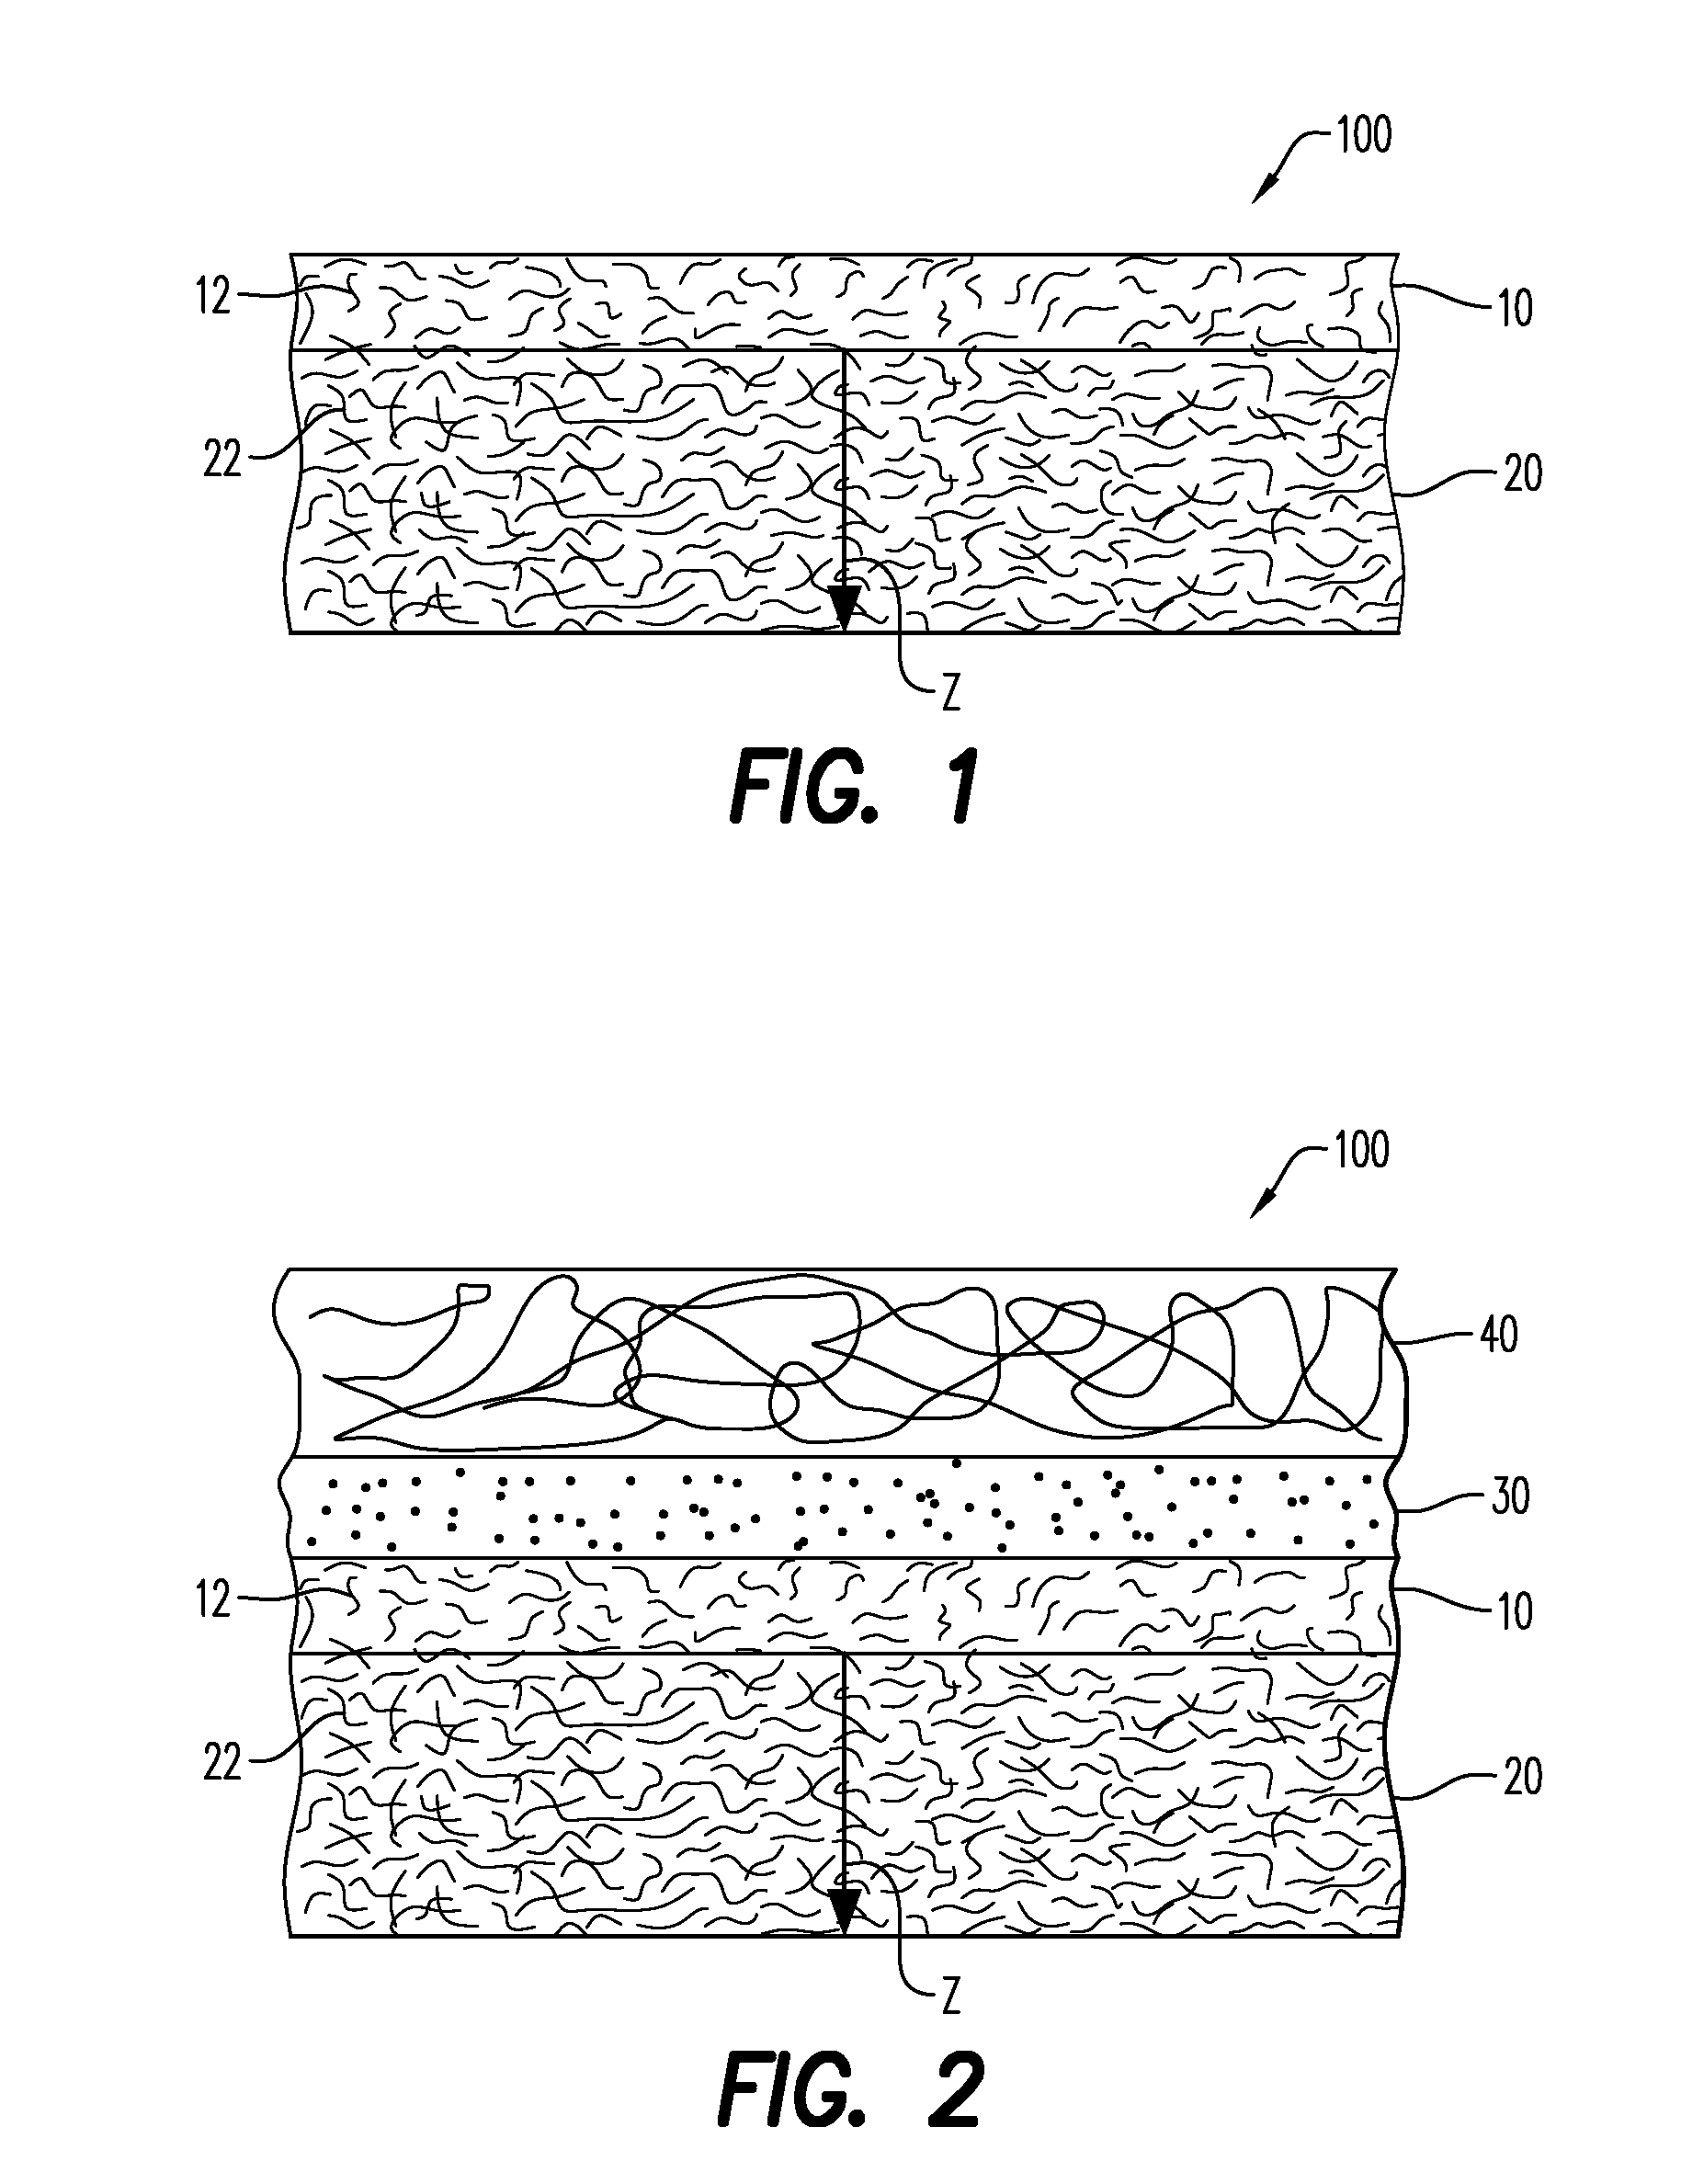 Composite filter media including a nanofiber layer formed directly onto a conductive layer